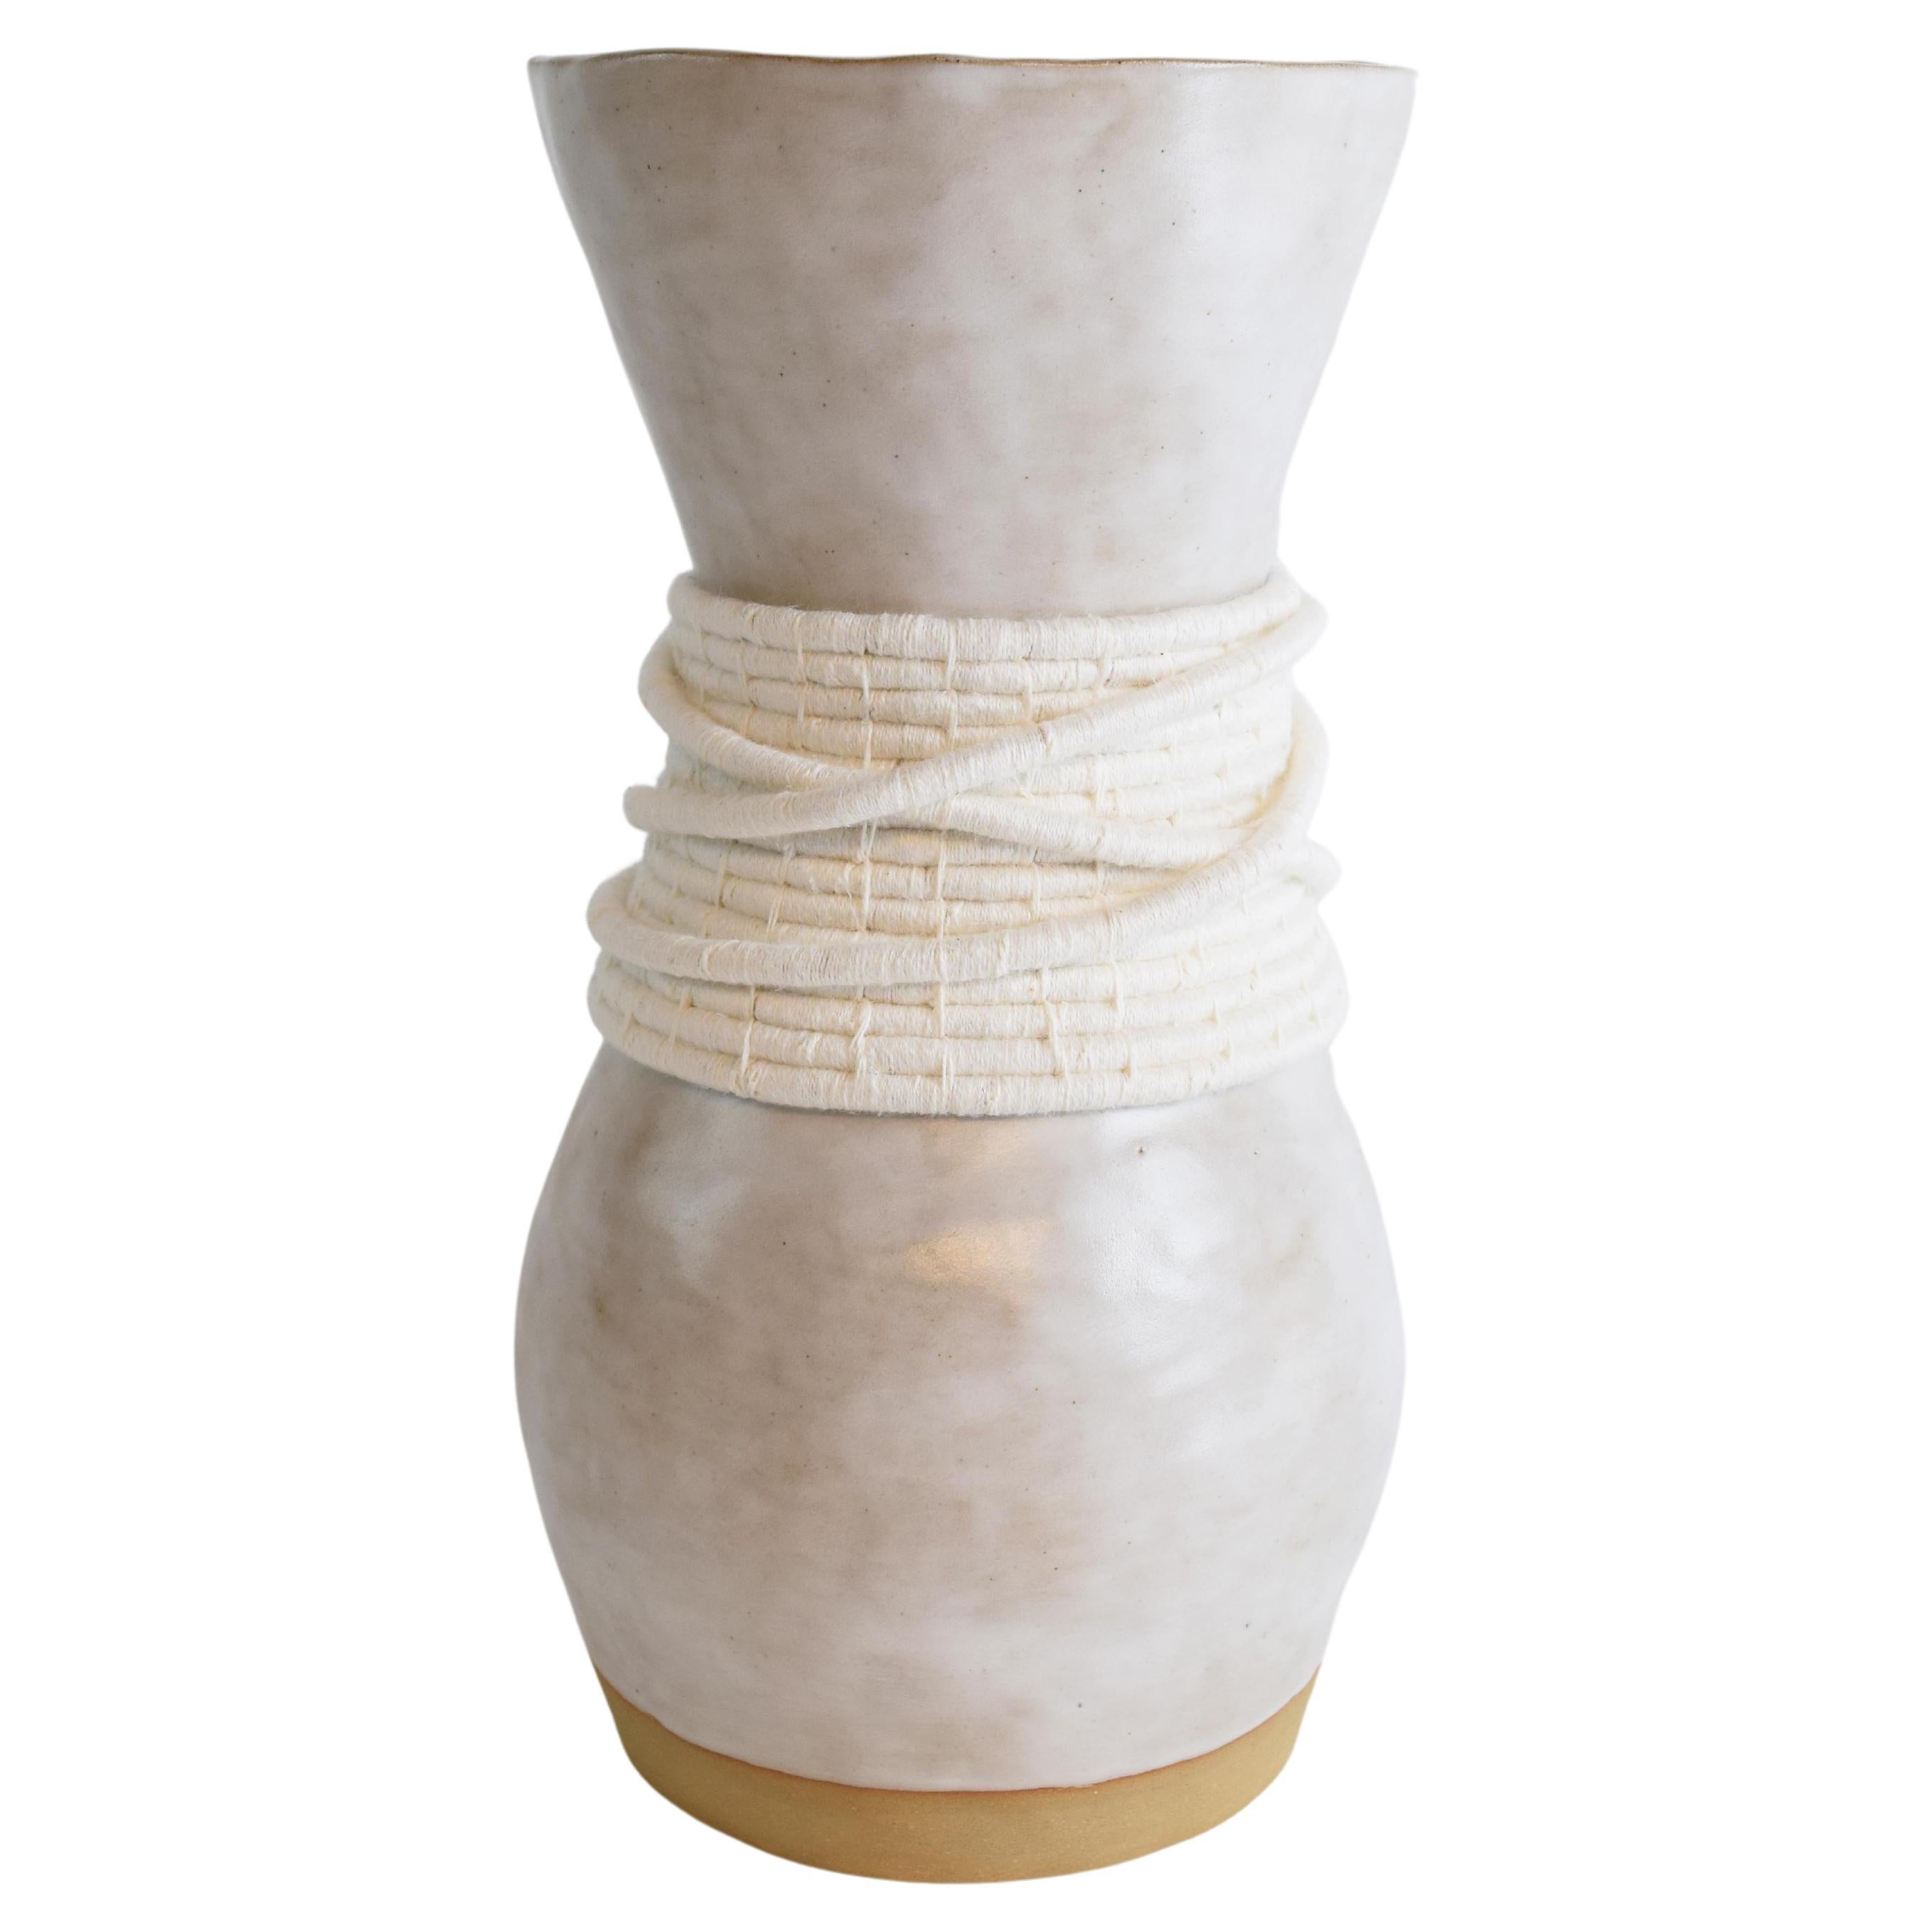 One of a Kind Ceramic & Fiber Vase #809  - White Glaze with Woven White Cotton For Sale